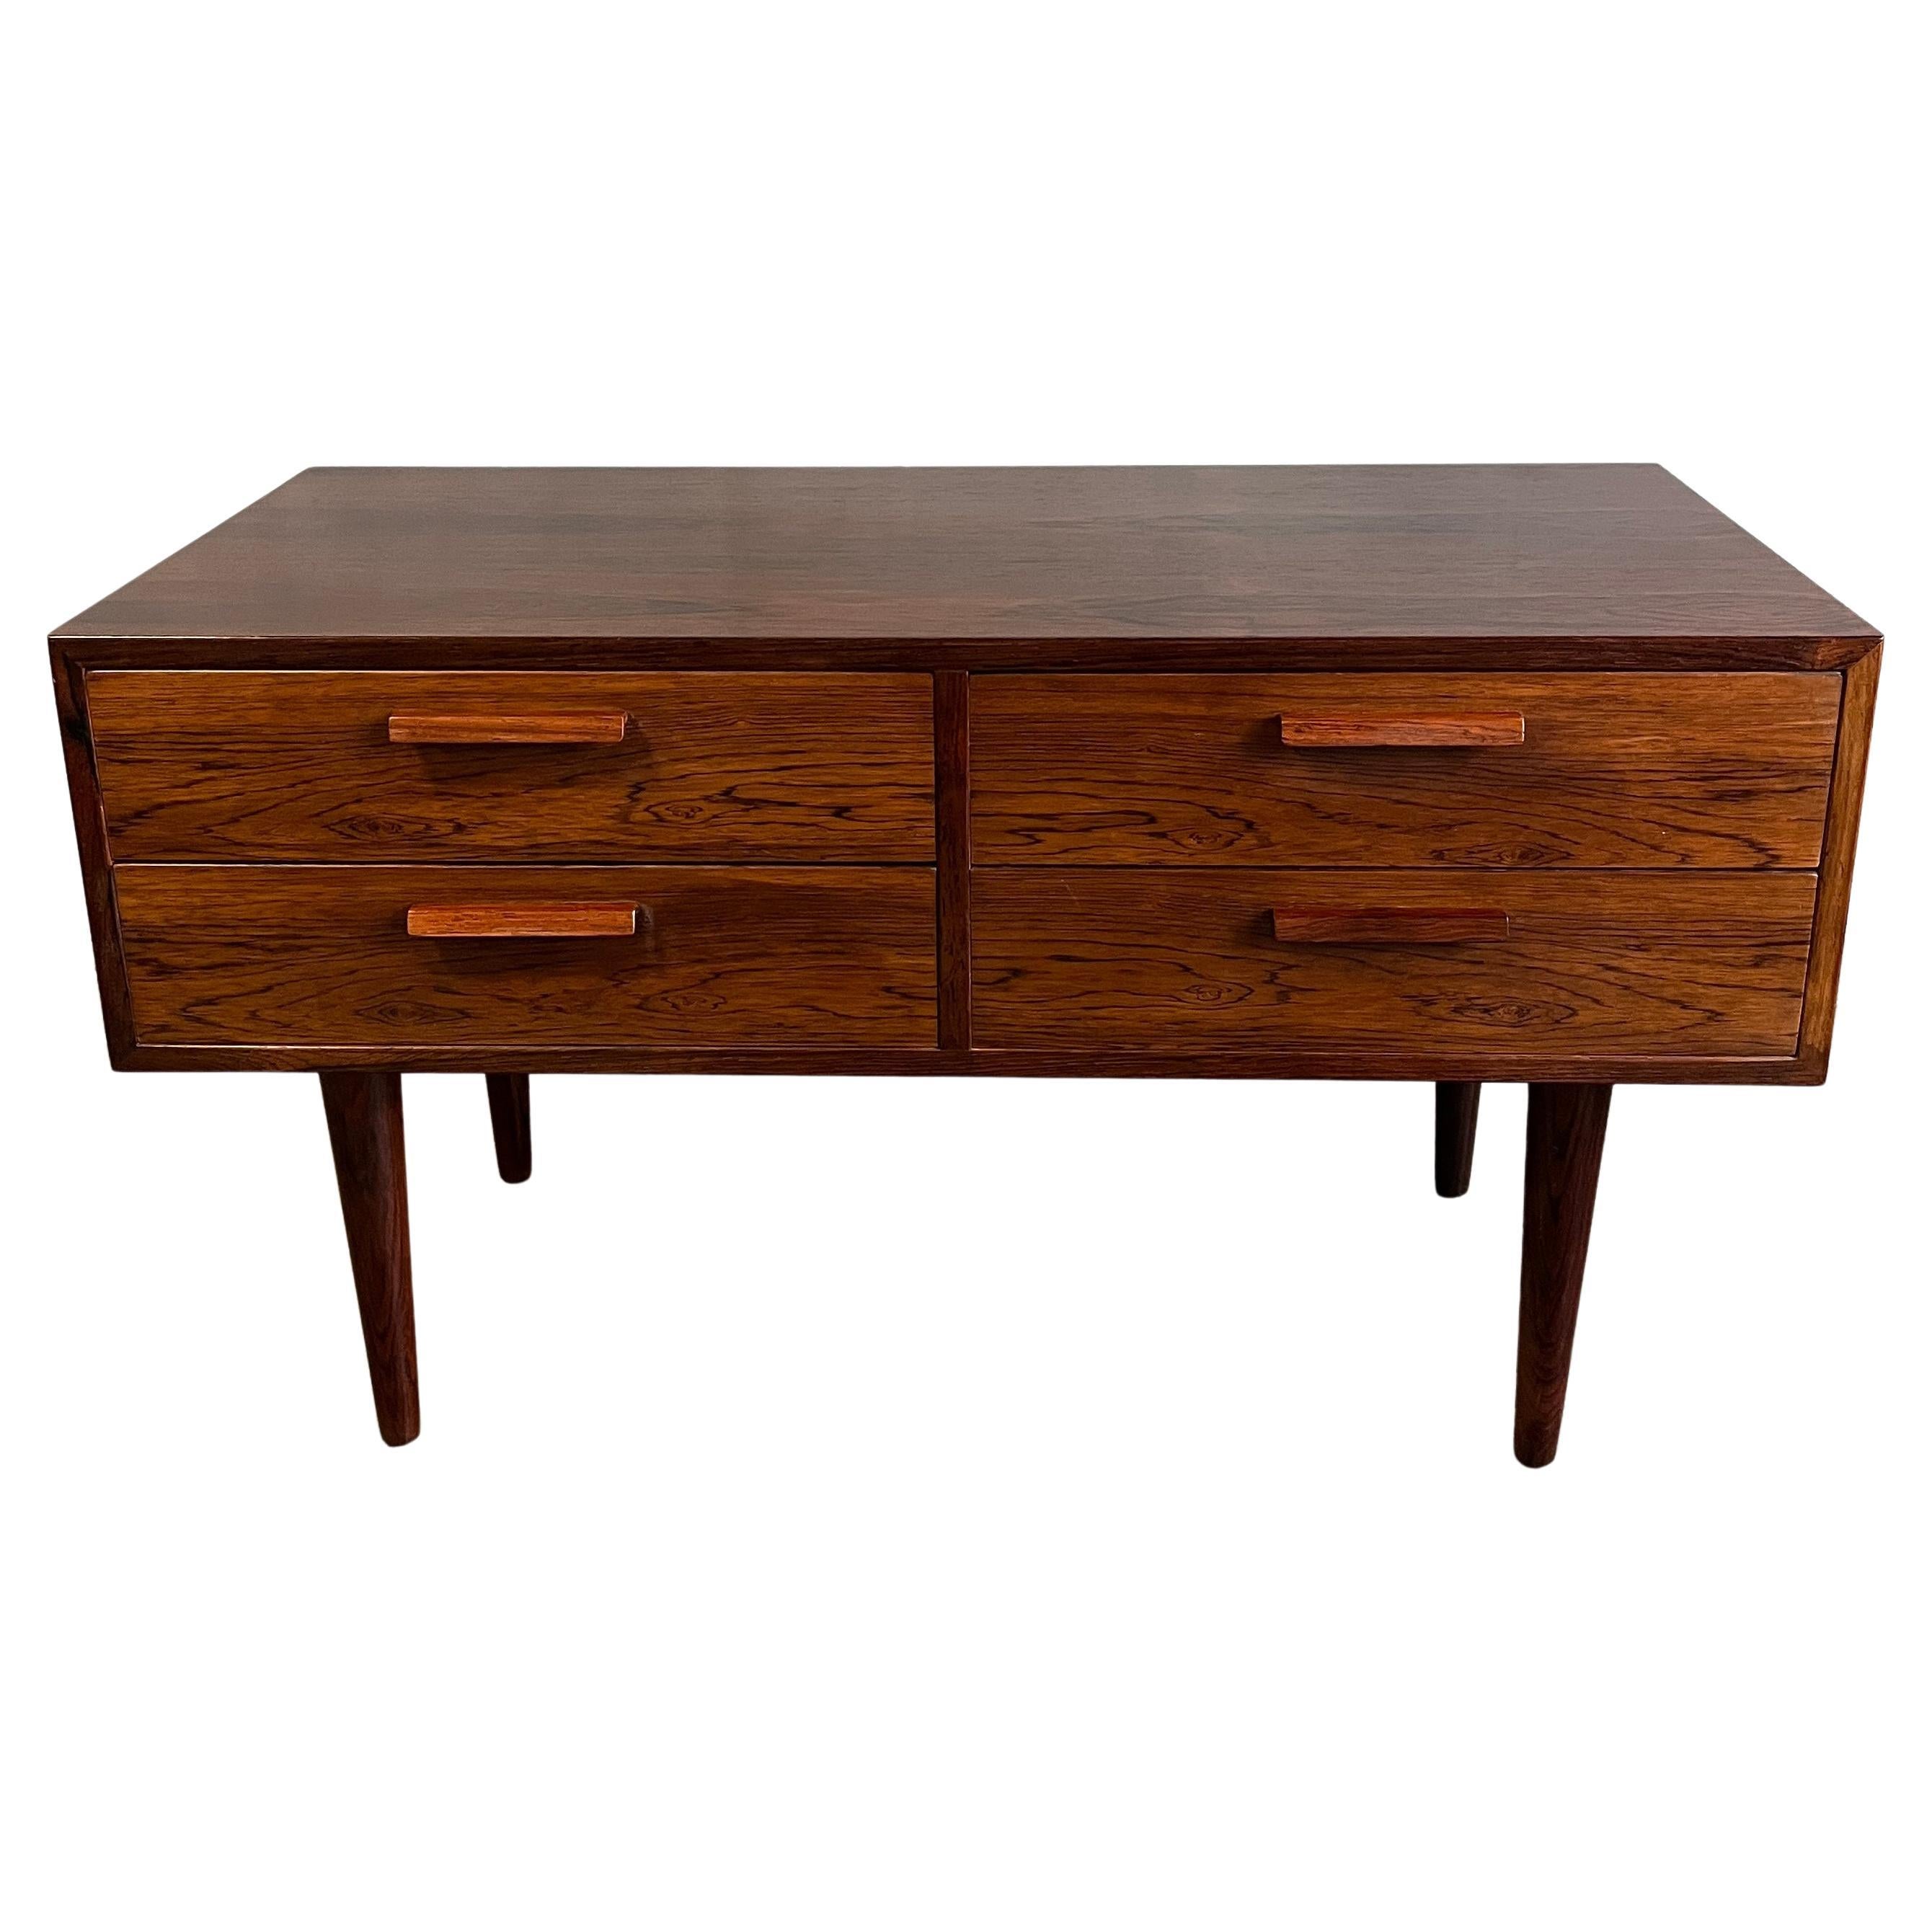 Superb Kai Kristiansen Rosewood Chest of Drawers For Sale